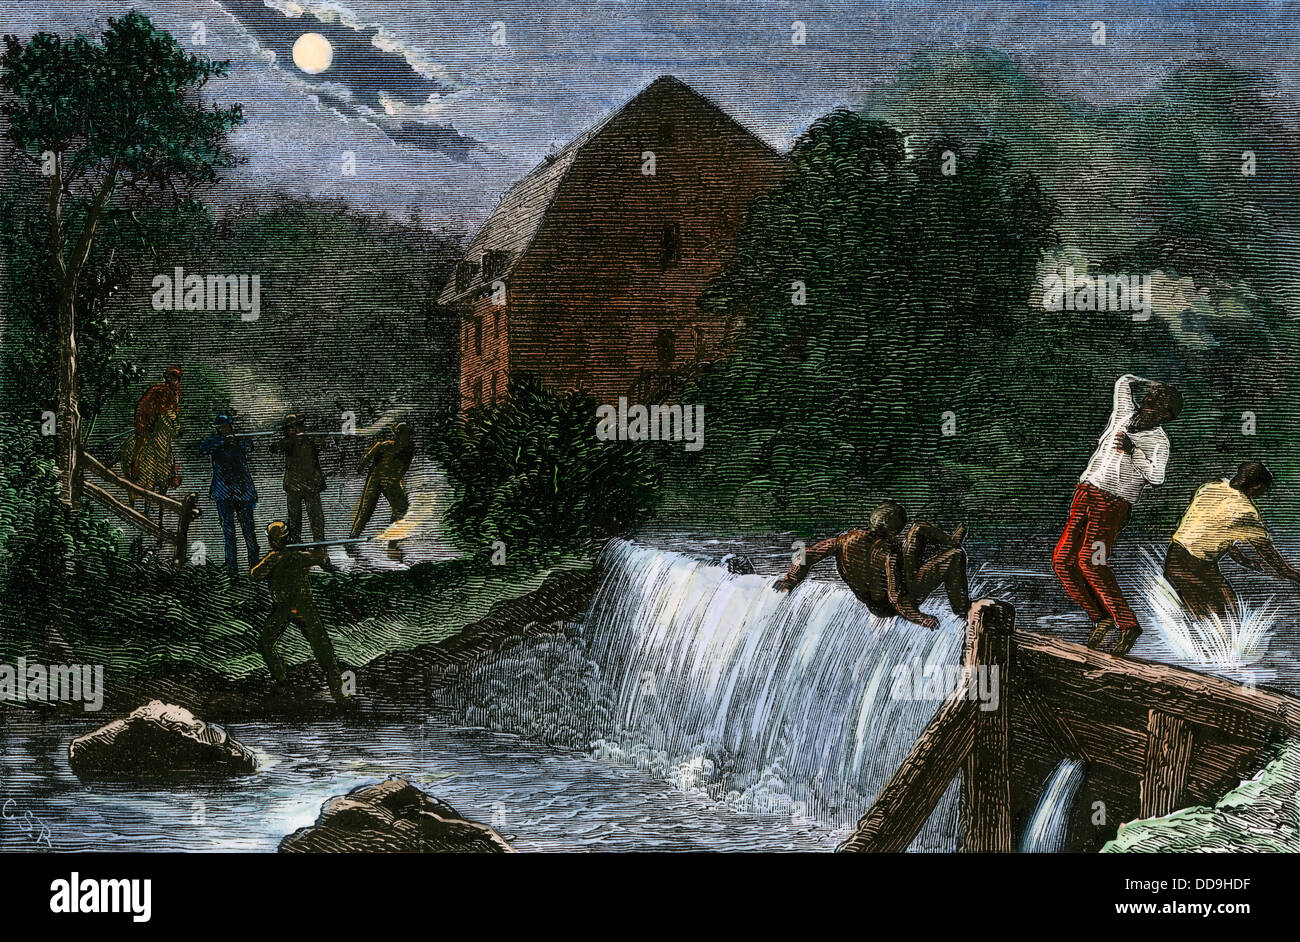 Ku Klux Klan members shooting black people under cover of darkness, US South, 1870s. Hand-colored woodcut Stock Photo